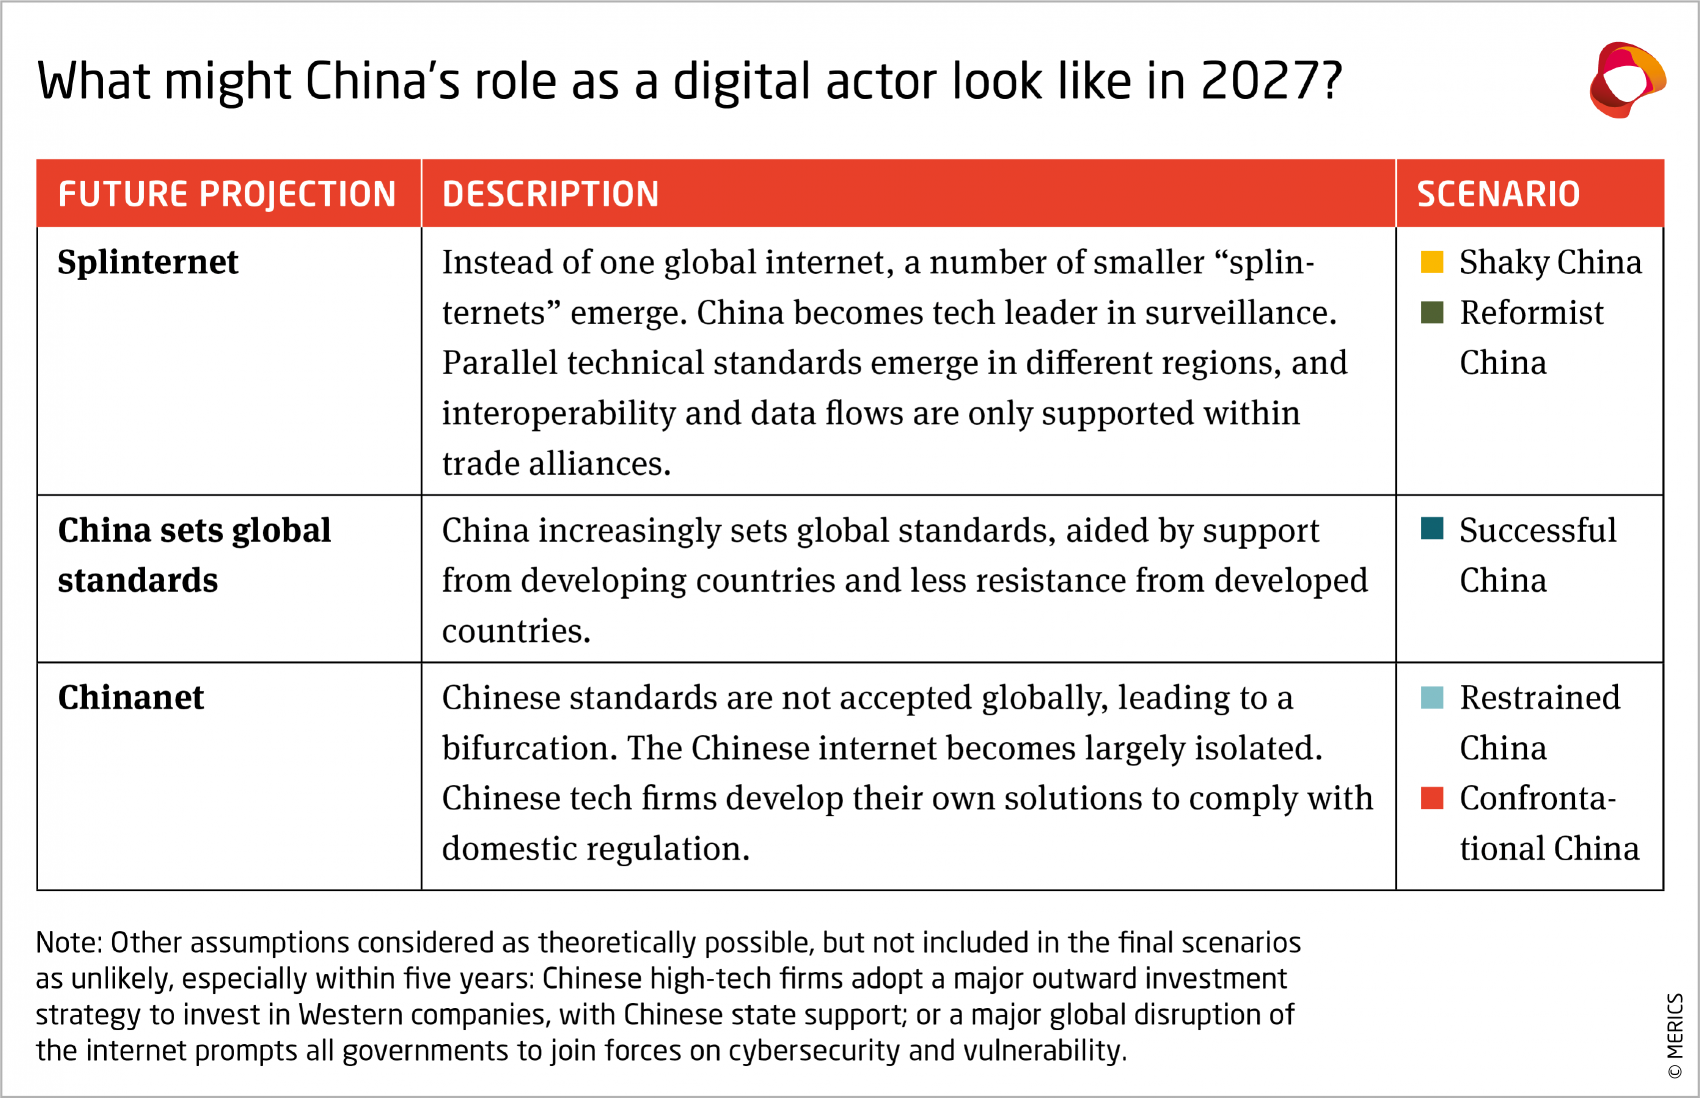 China as a digital actor in 2027